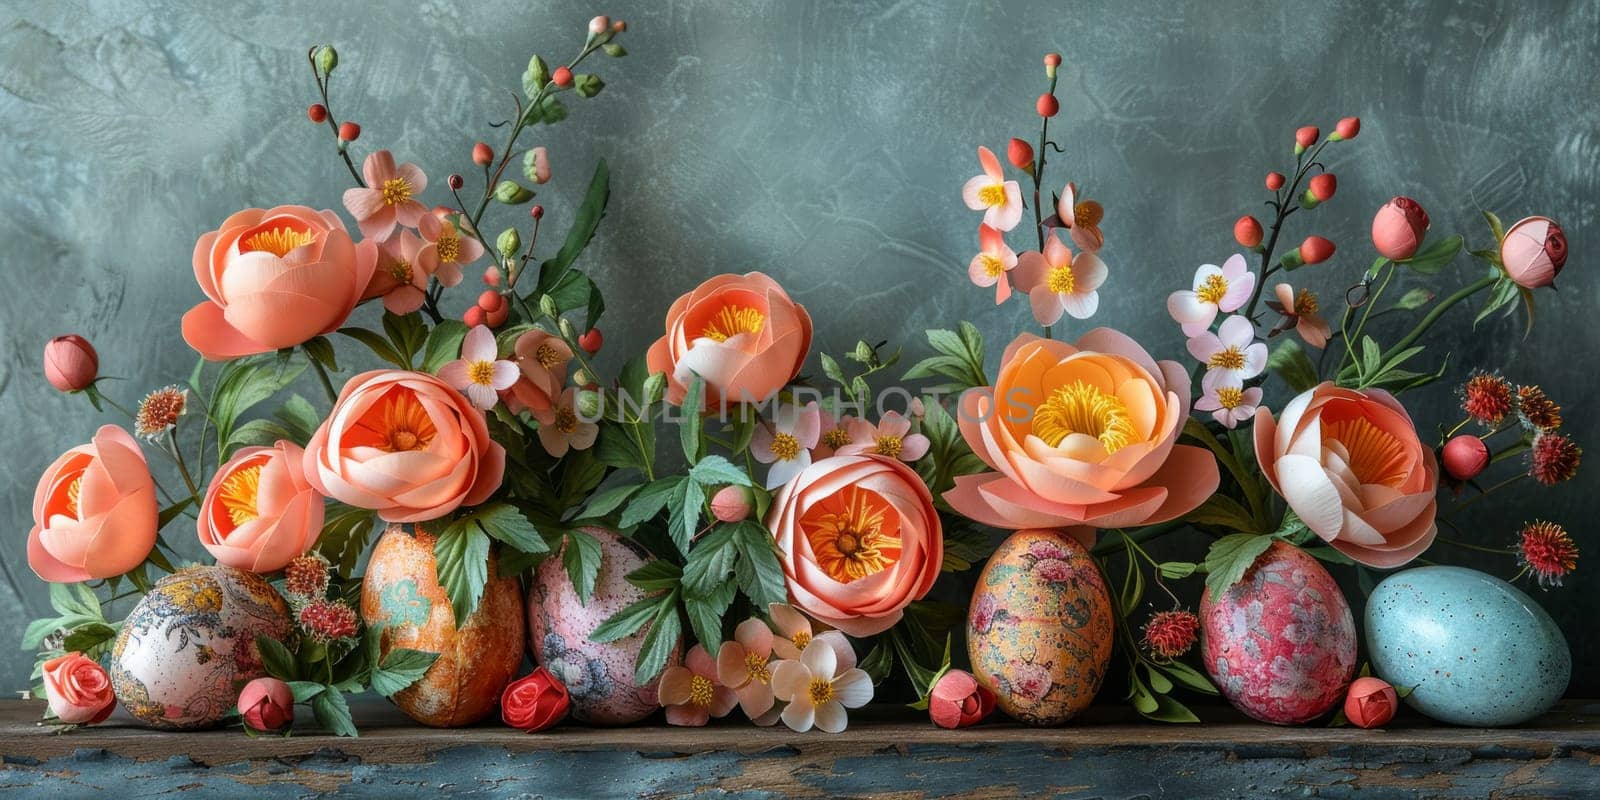 Vibrant Easter flowers bloom joyfully on a shelf, creating a colorful display of natures beauty by but_photo